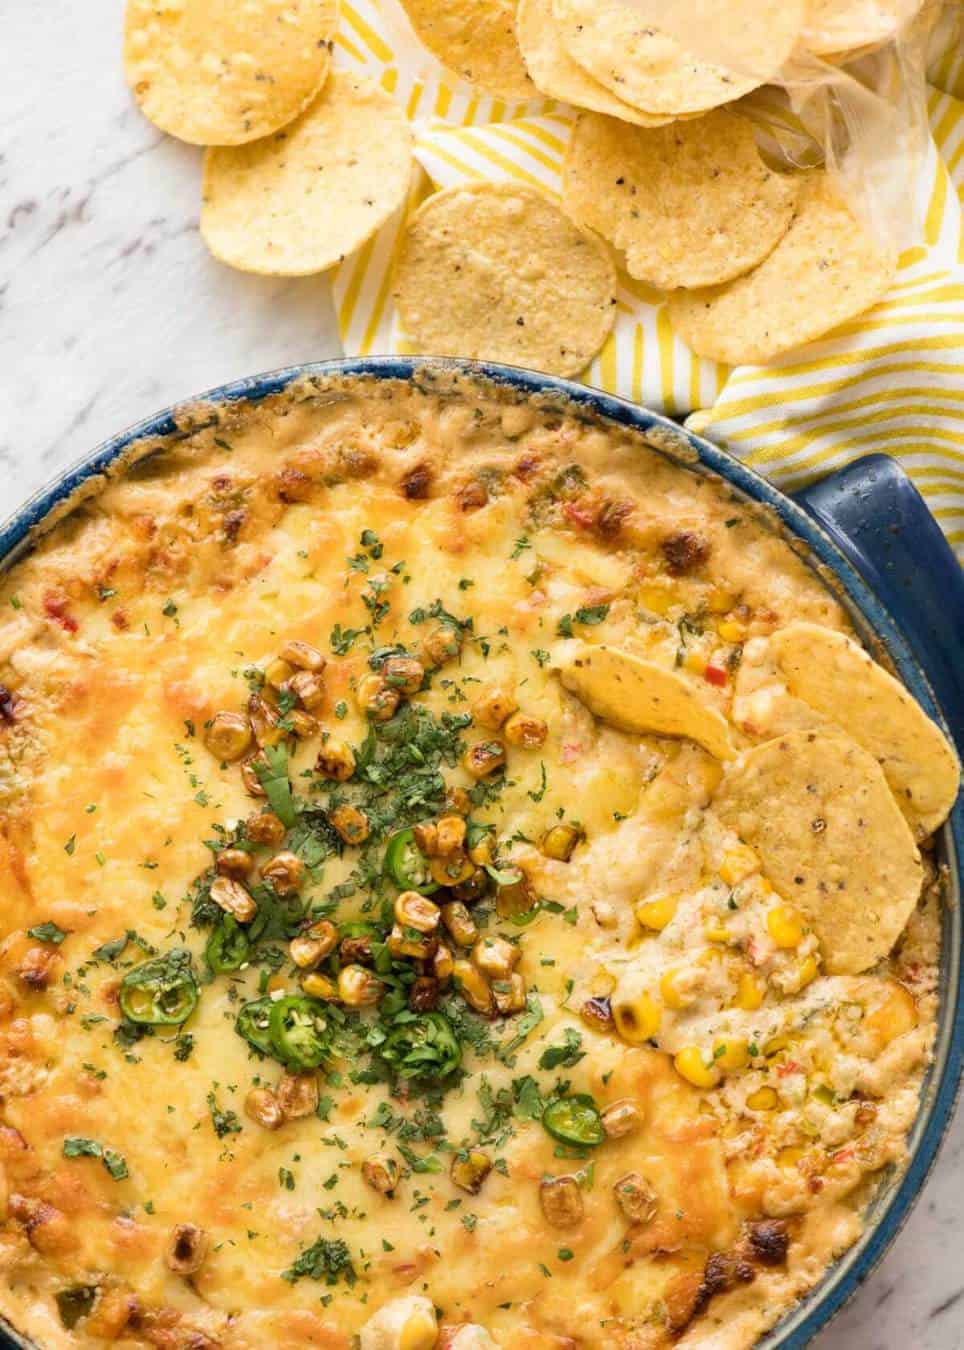 Essential Super Bowl food - a big batch Hot Corn Dip that's made for eating with eyes glued to the TV screen. 